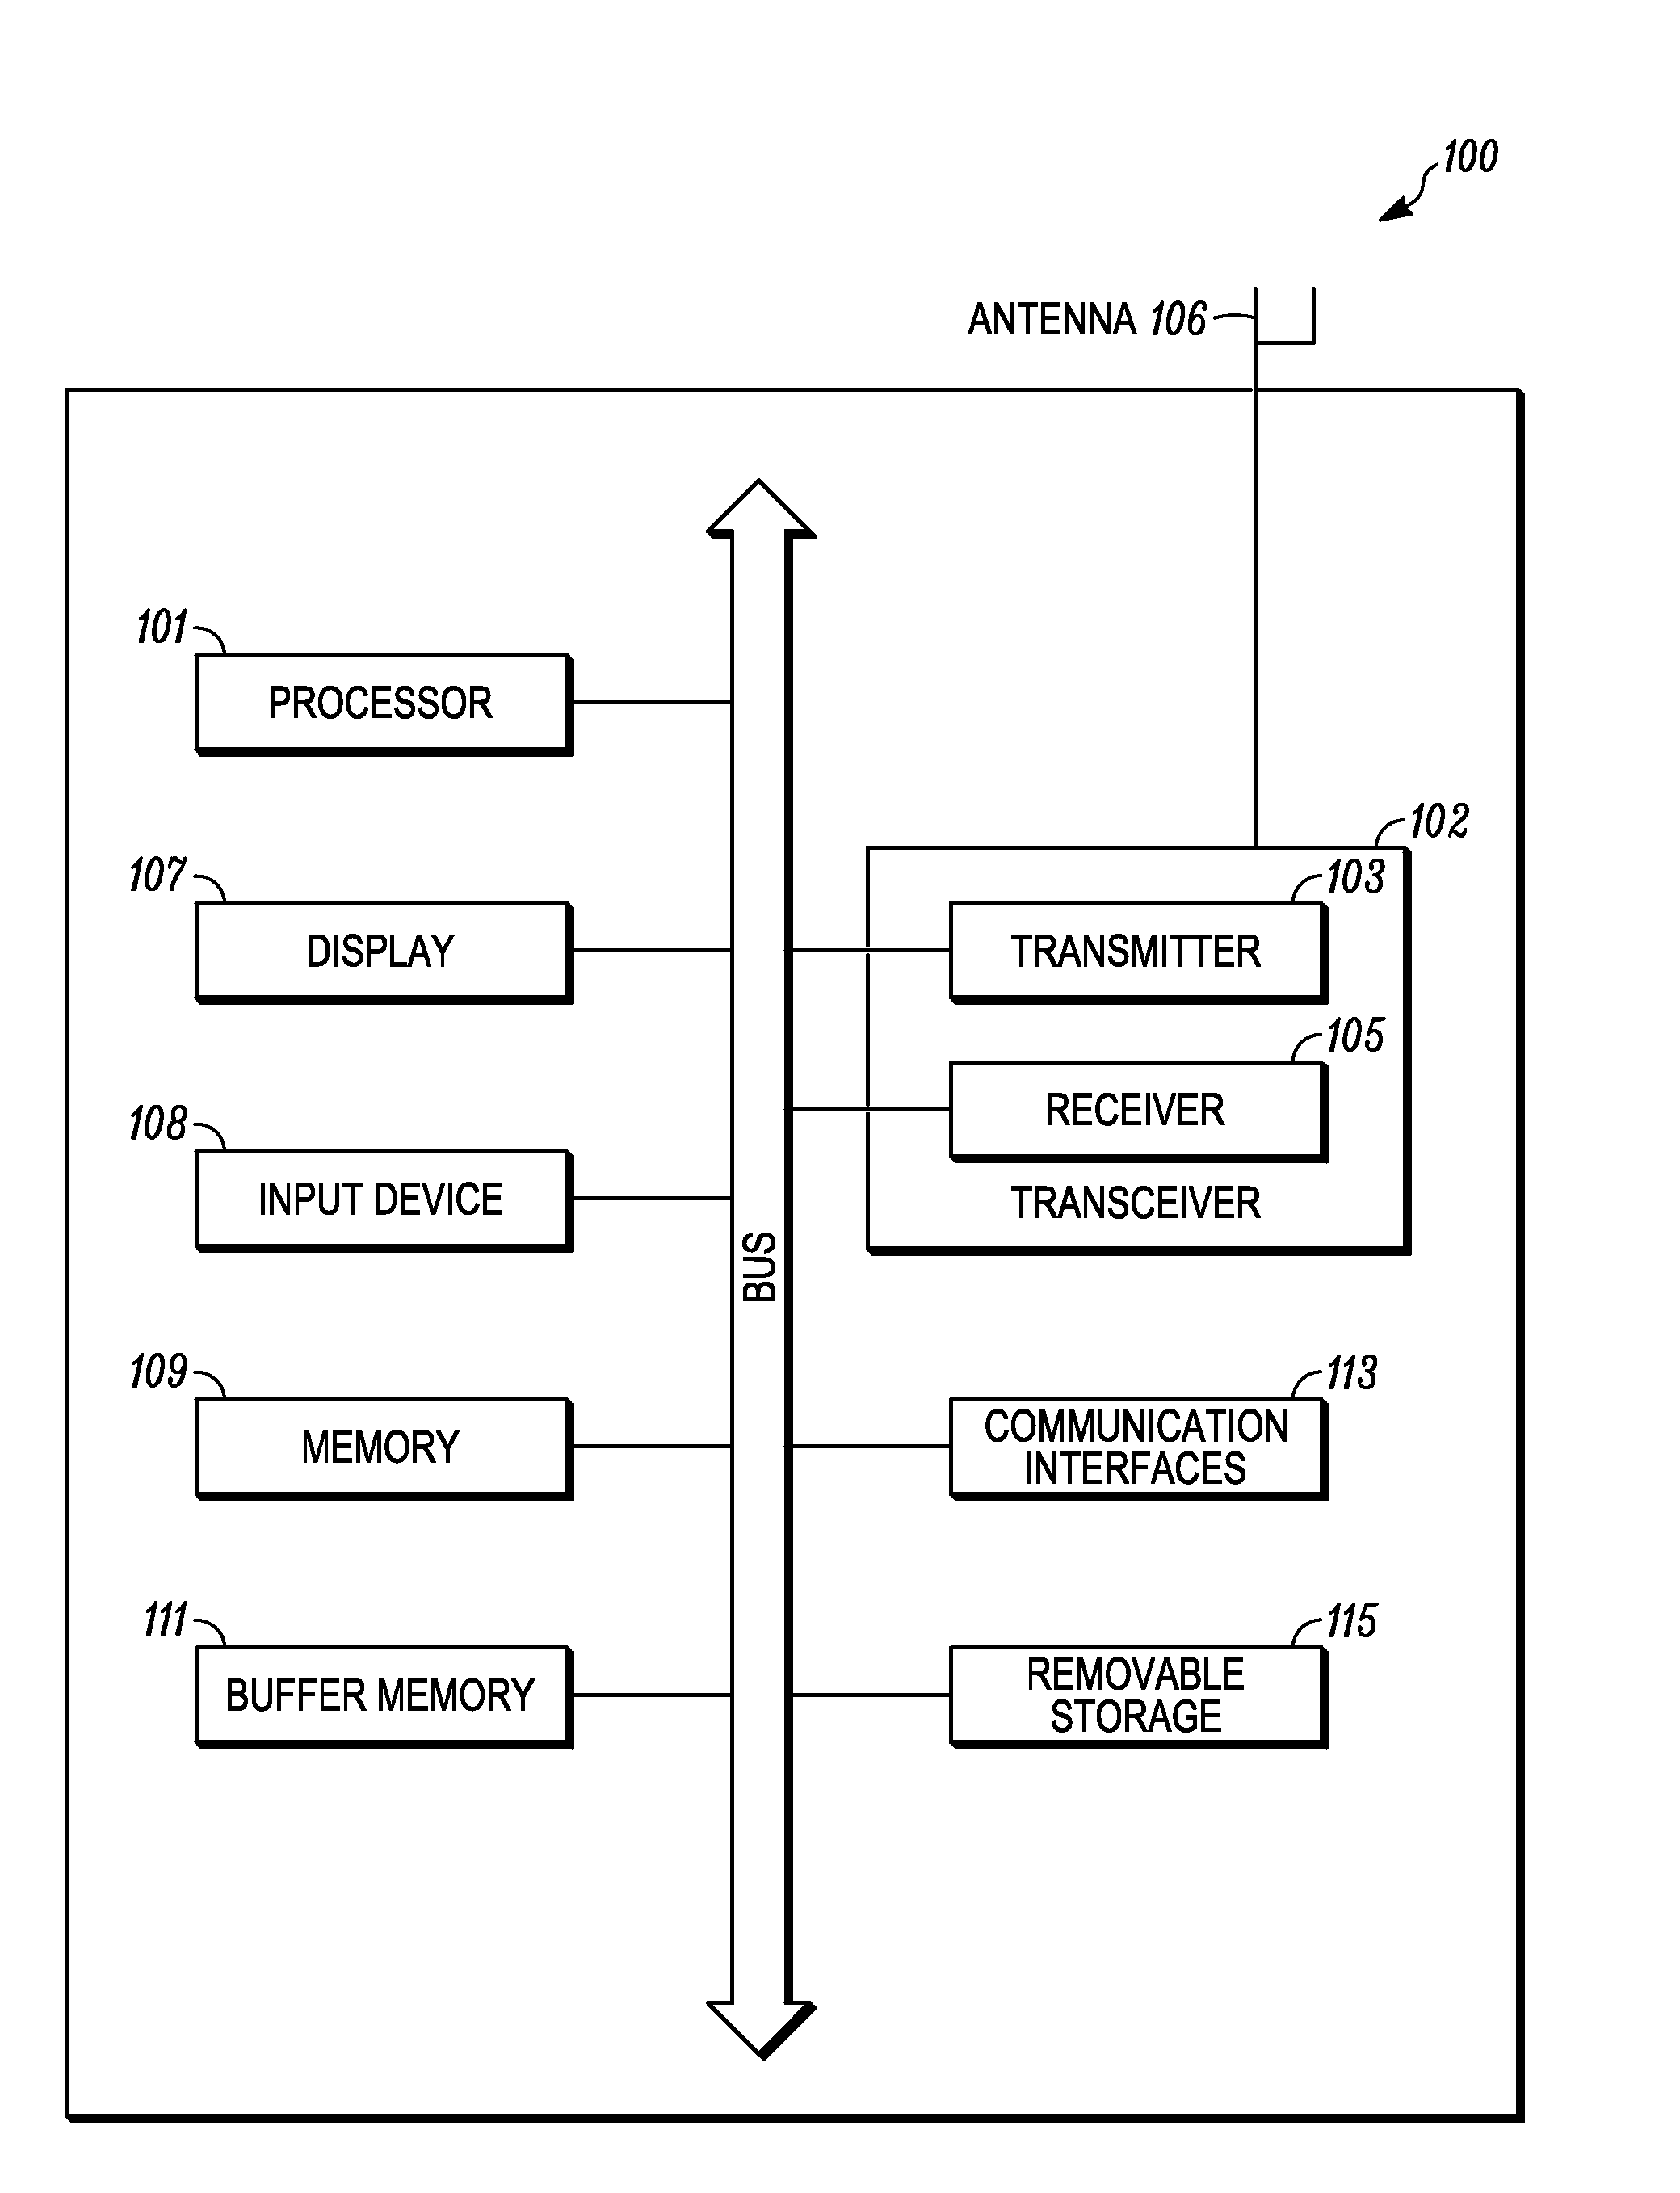 Method for determining data rate and packet length in mobile wireless networks